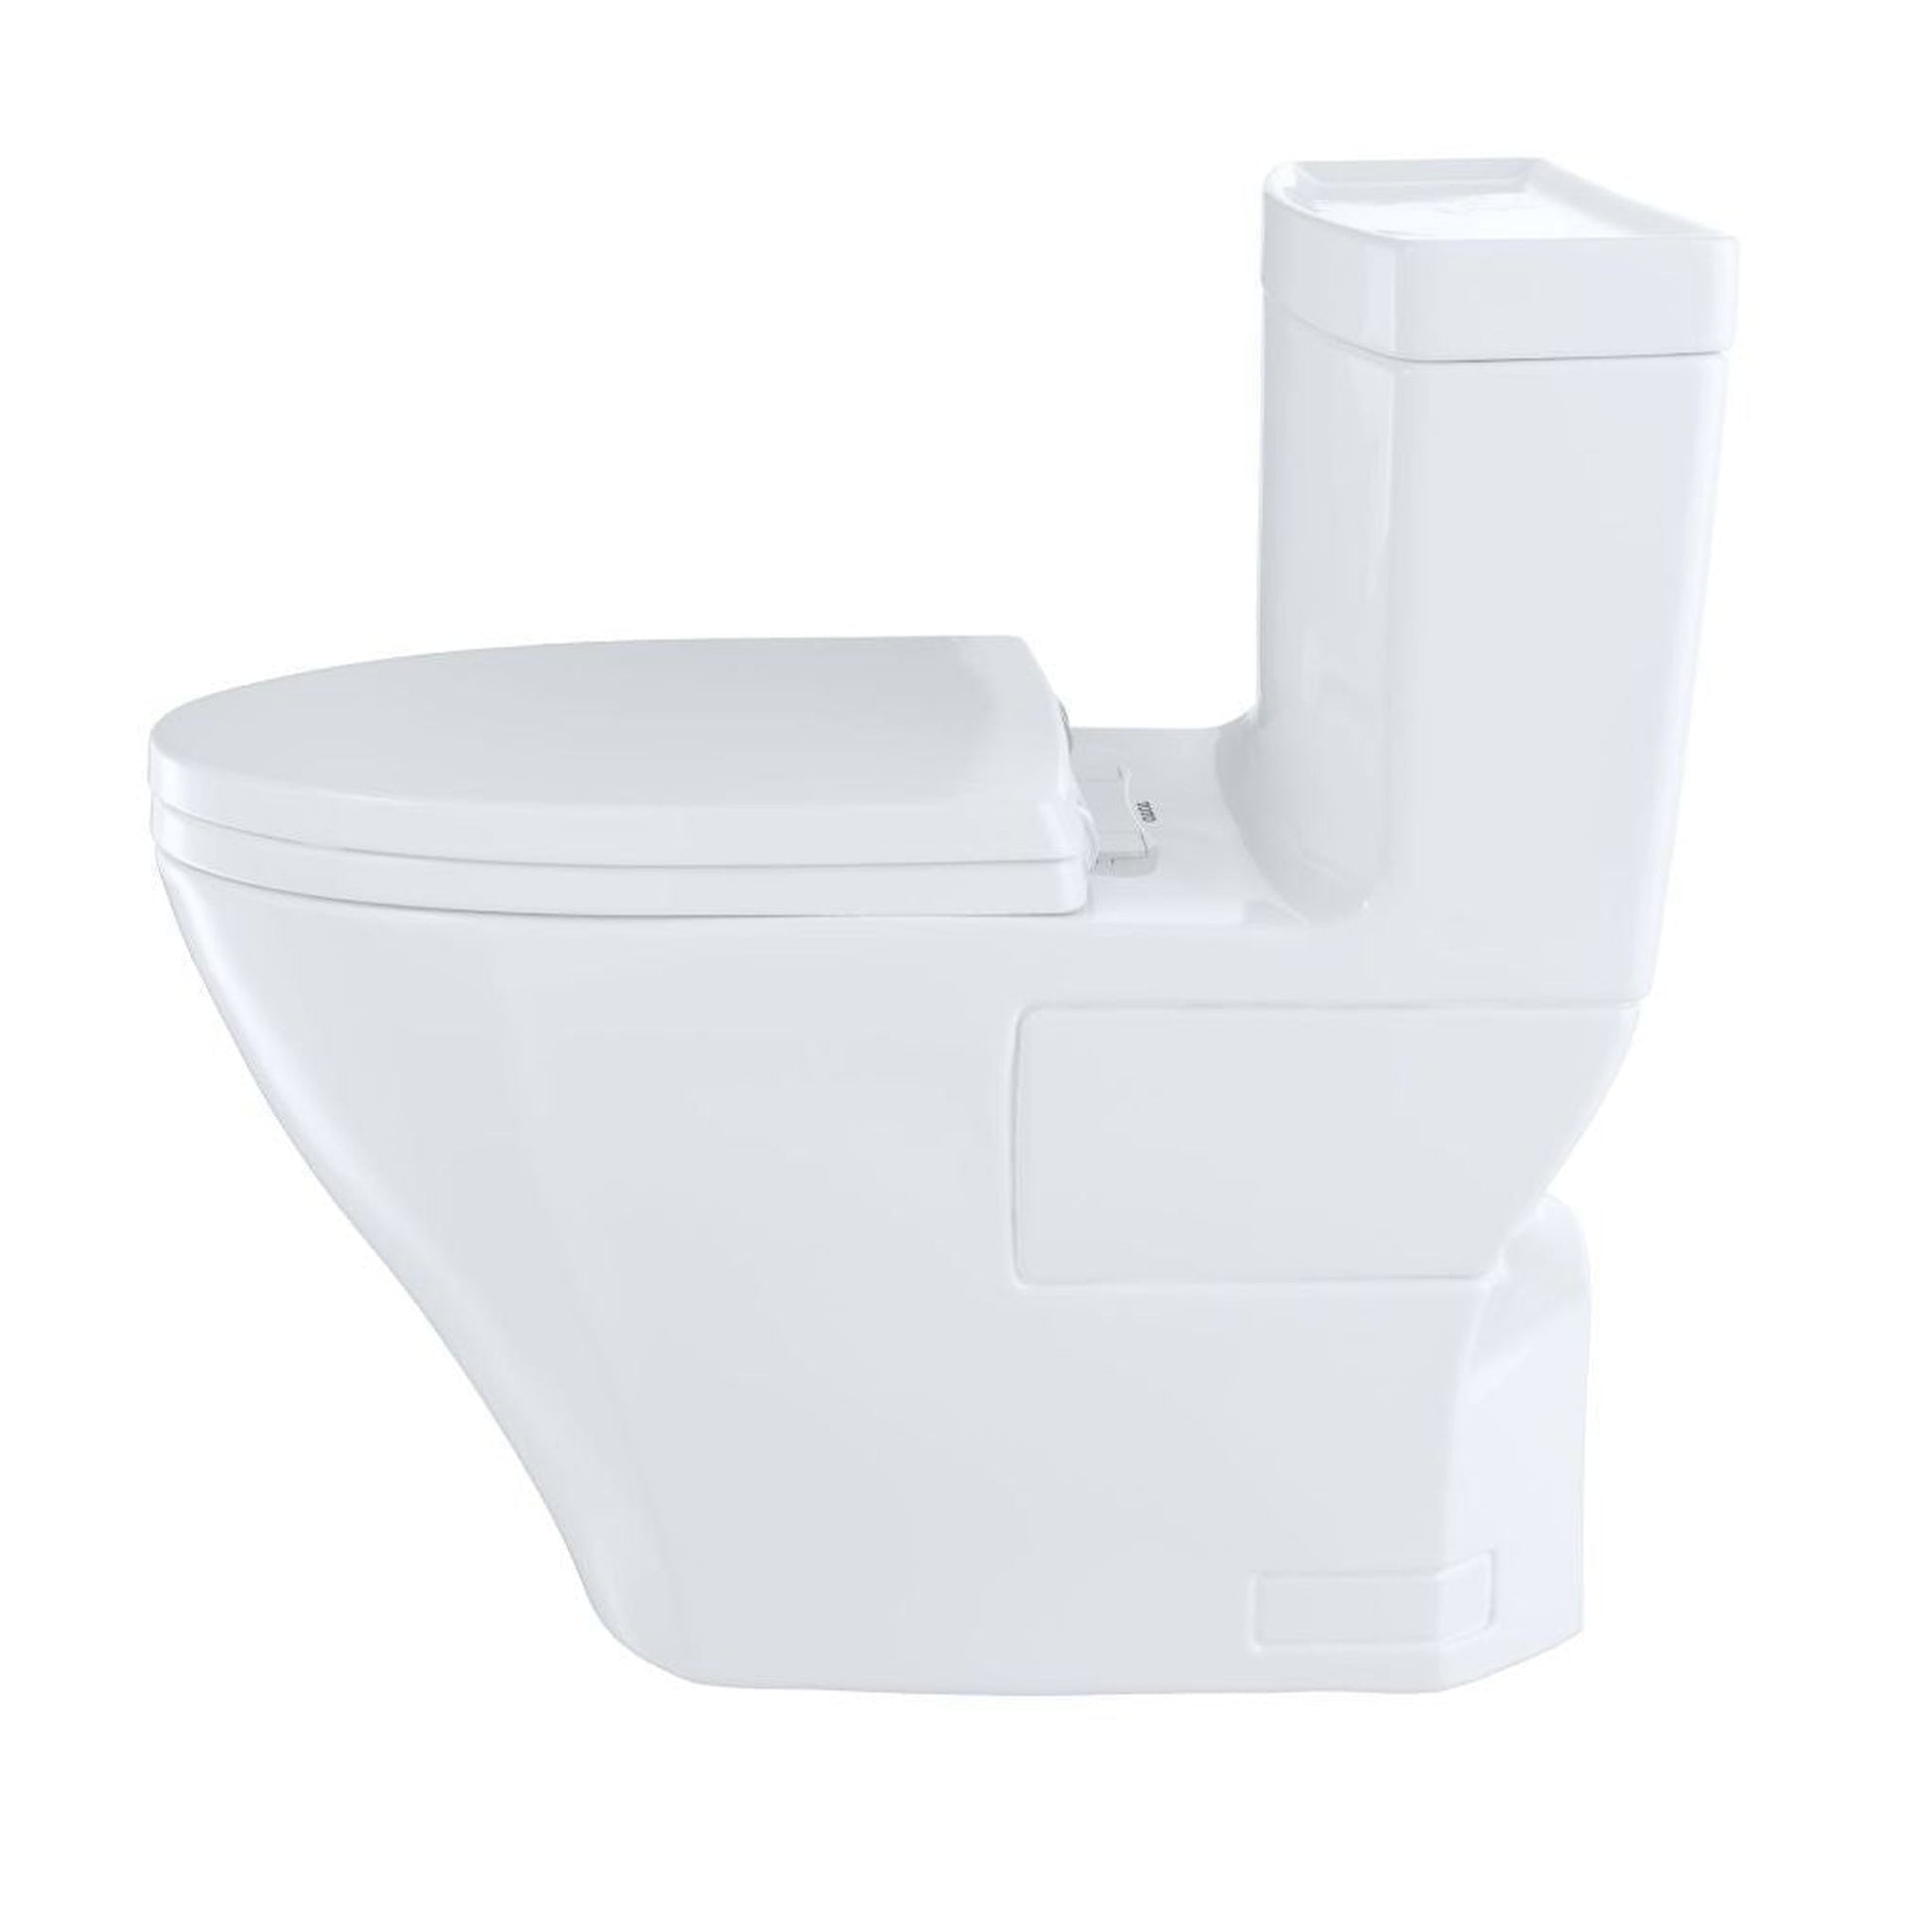 TOTO Aimes Cotton White 1.28 GPF Elongated One-Piece Toilet With Washlet+ Connection